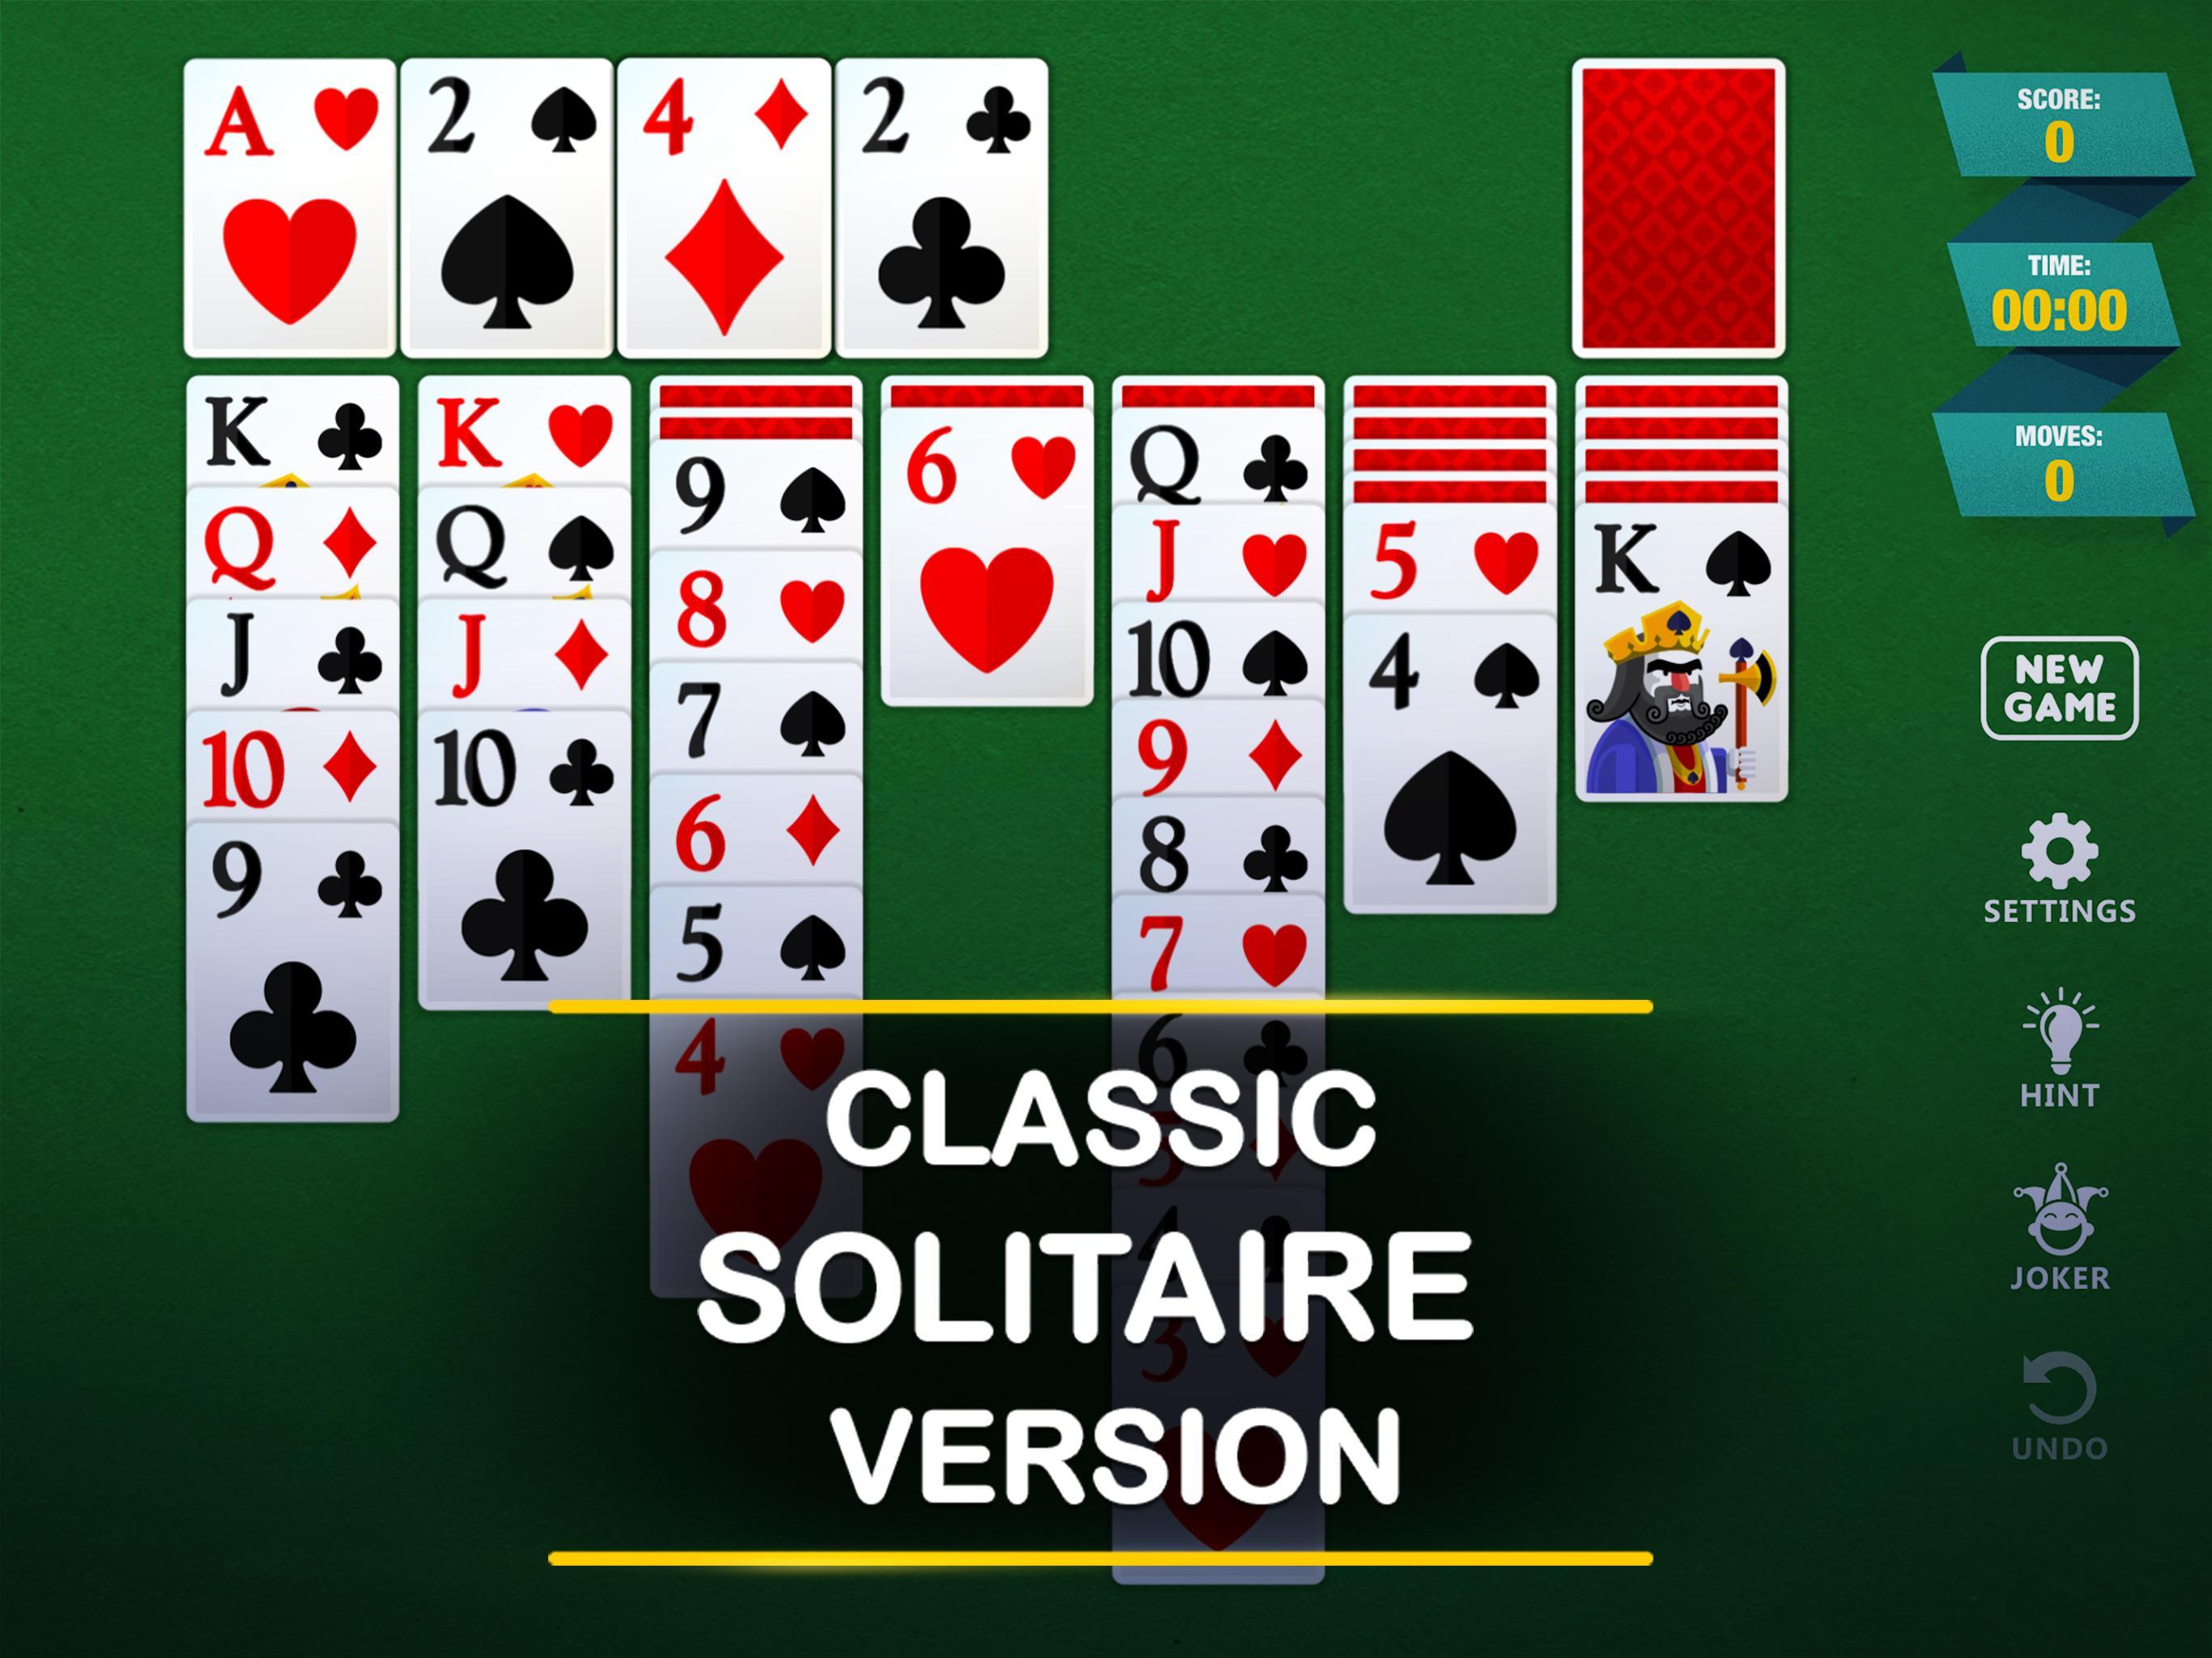 Solitaire Card Game Classic